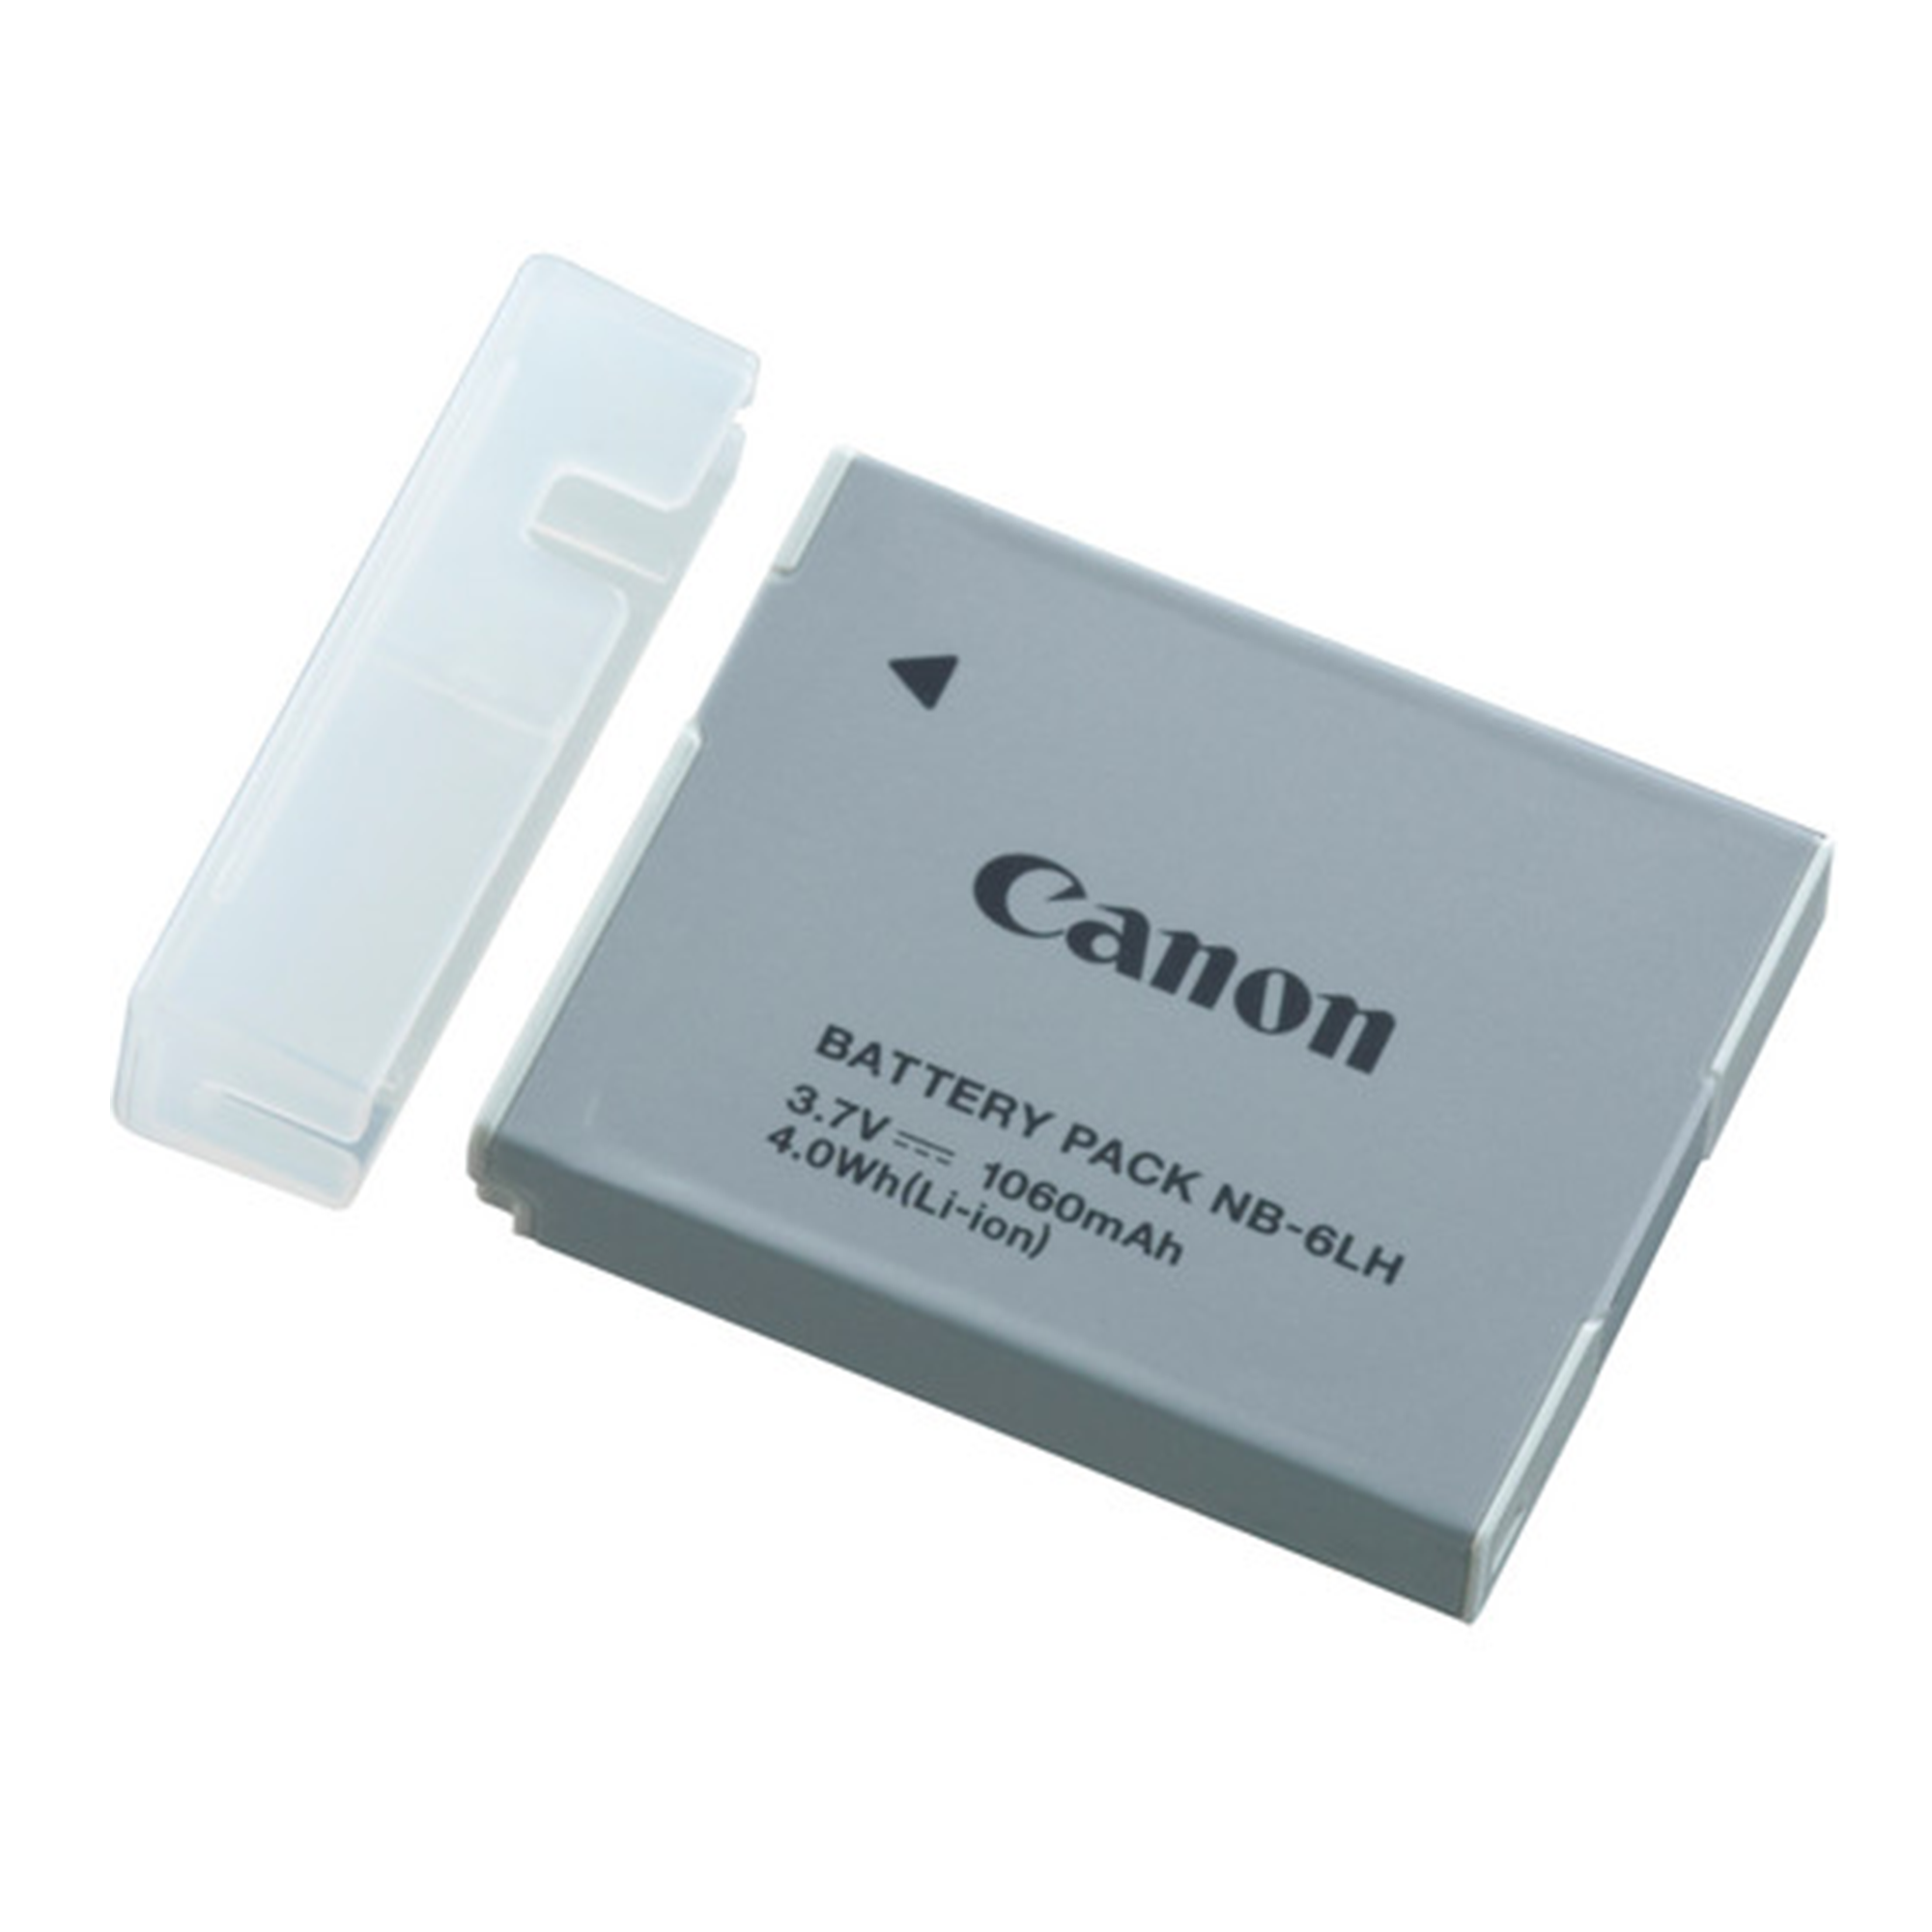 Canon Battery Pack NB-6LH